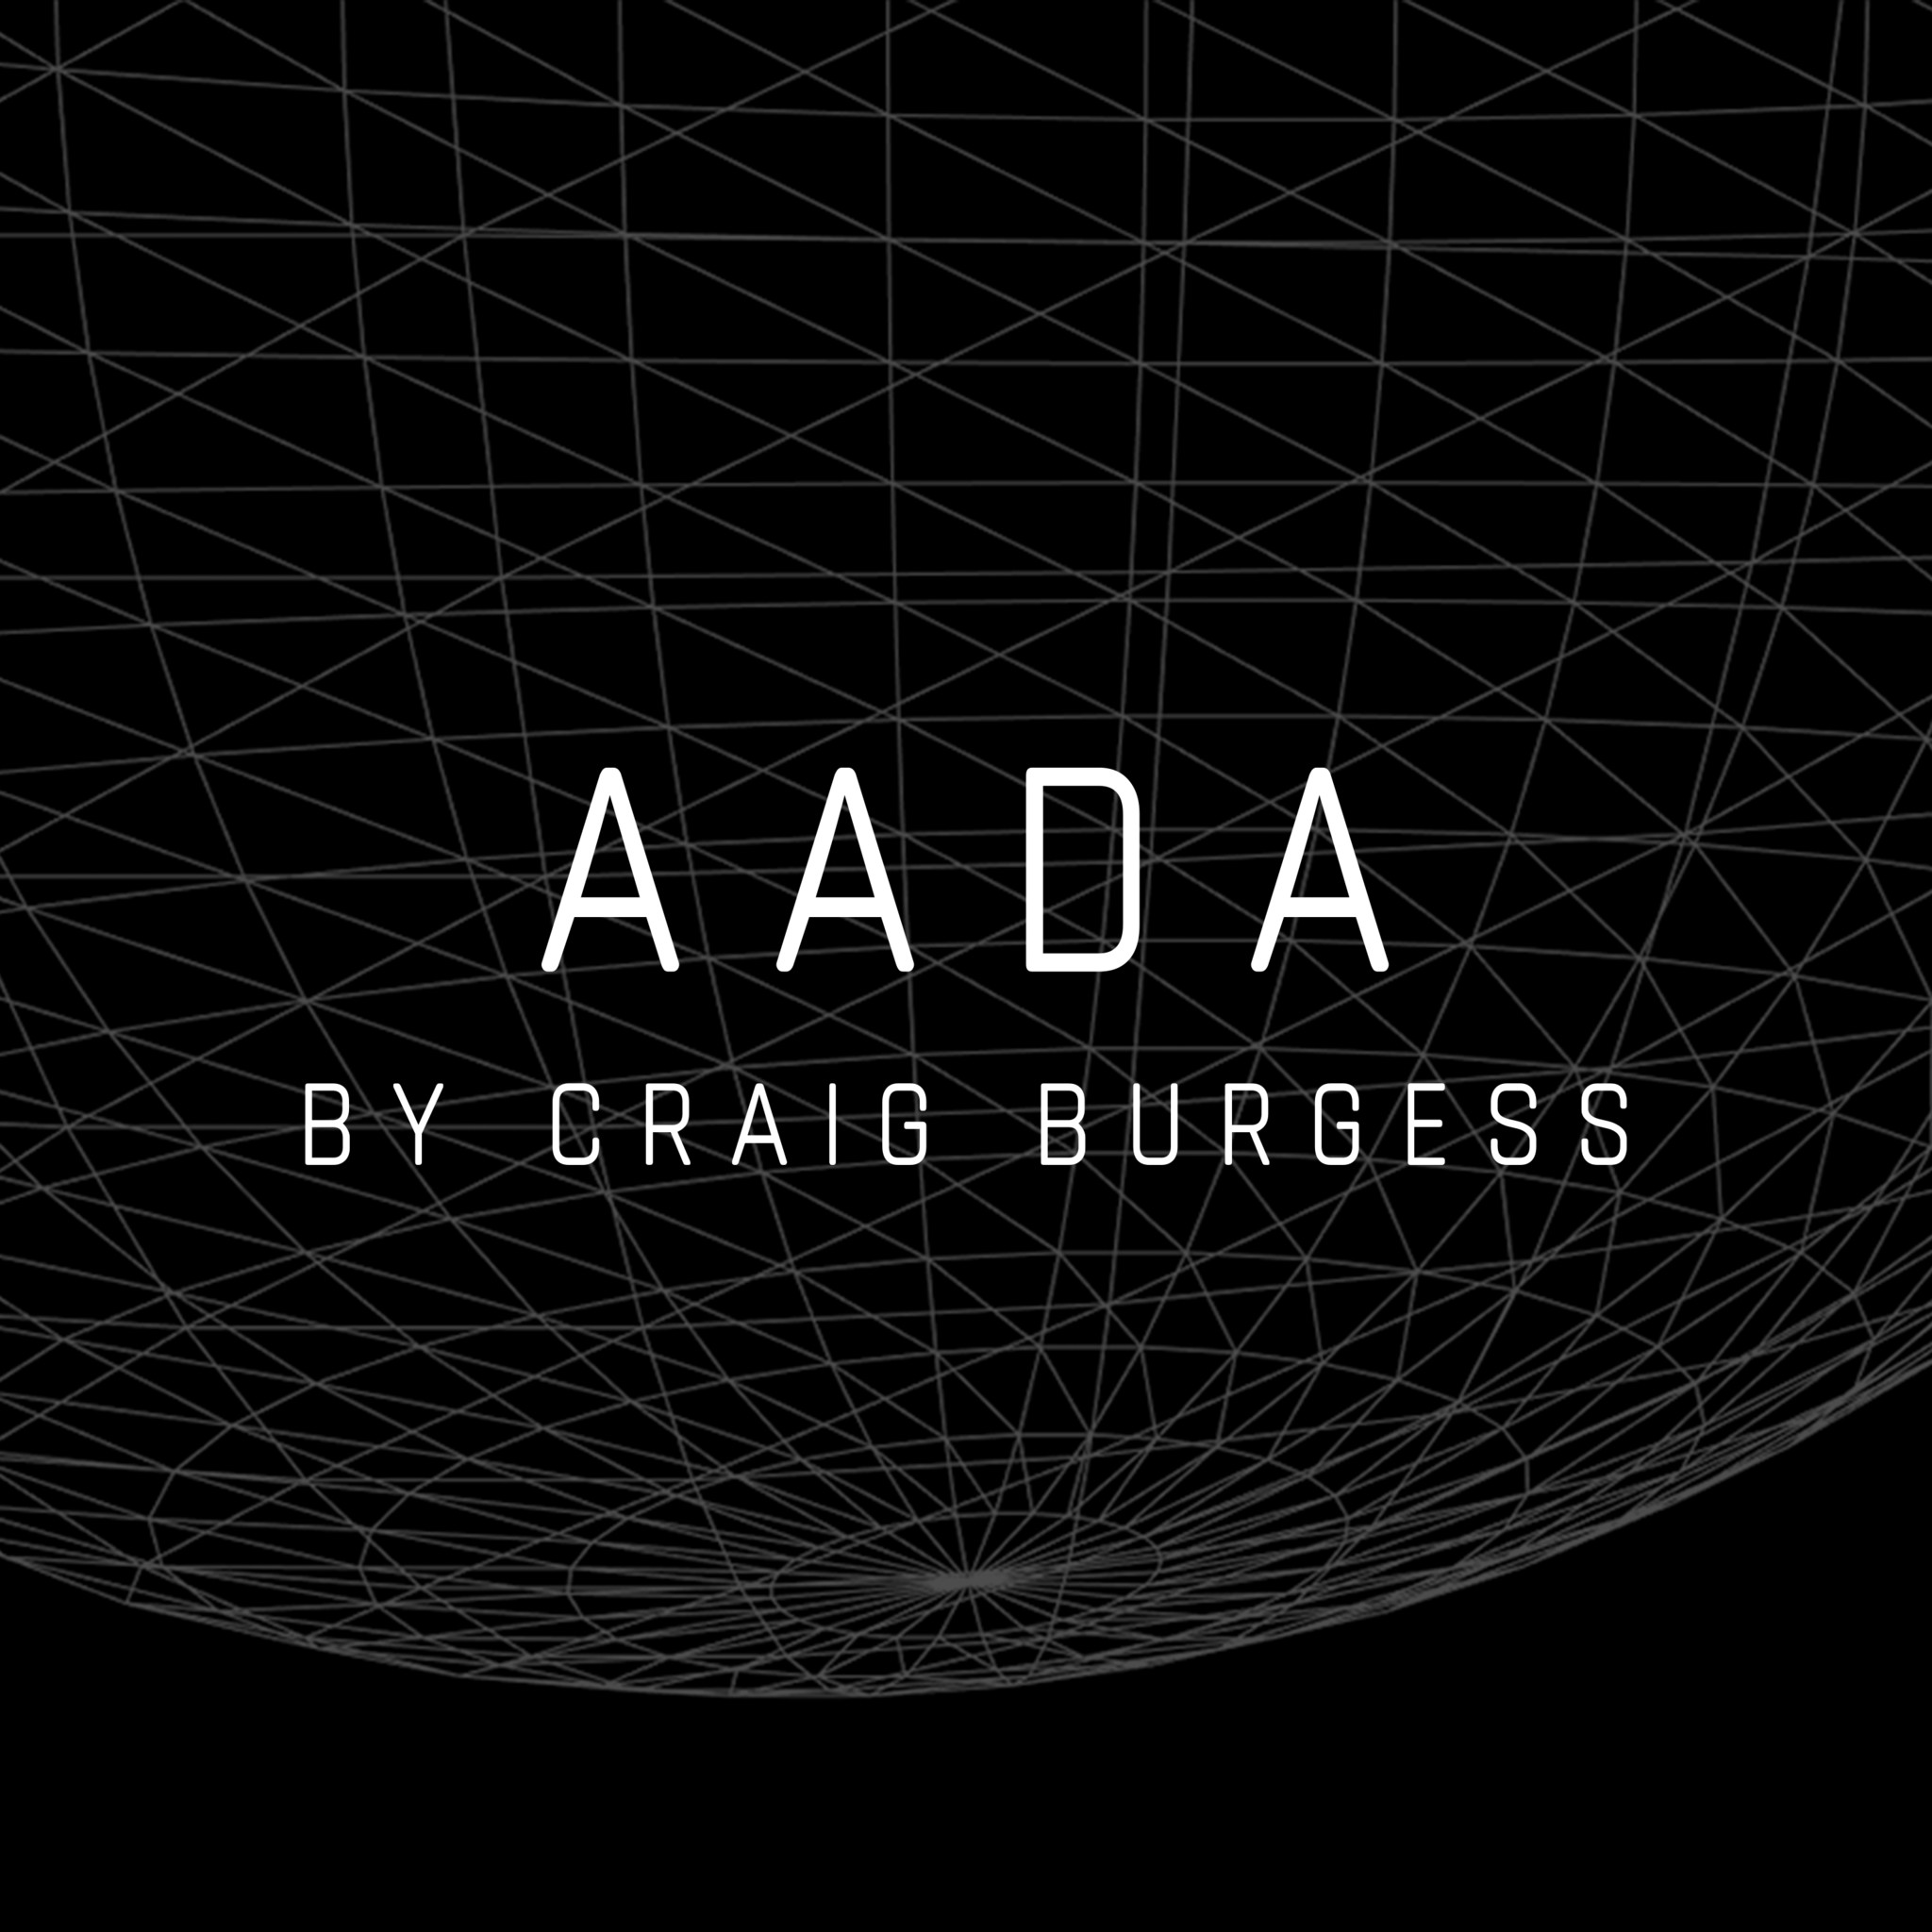 AADA - Raw, direct and live chats about design and creativity